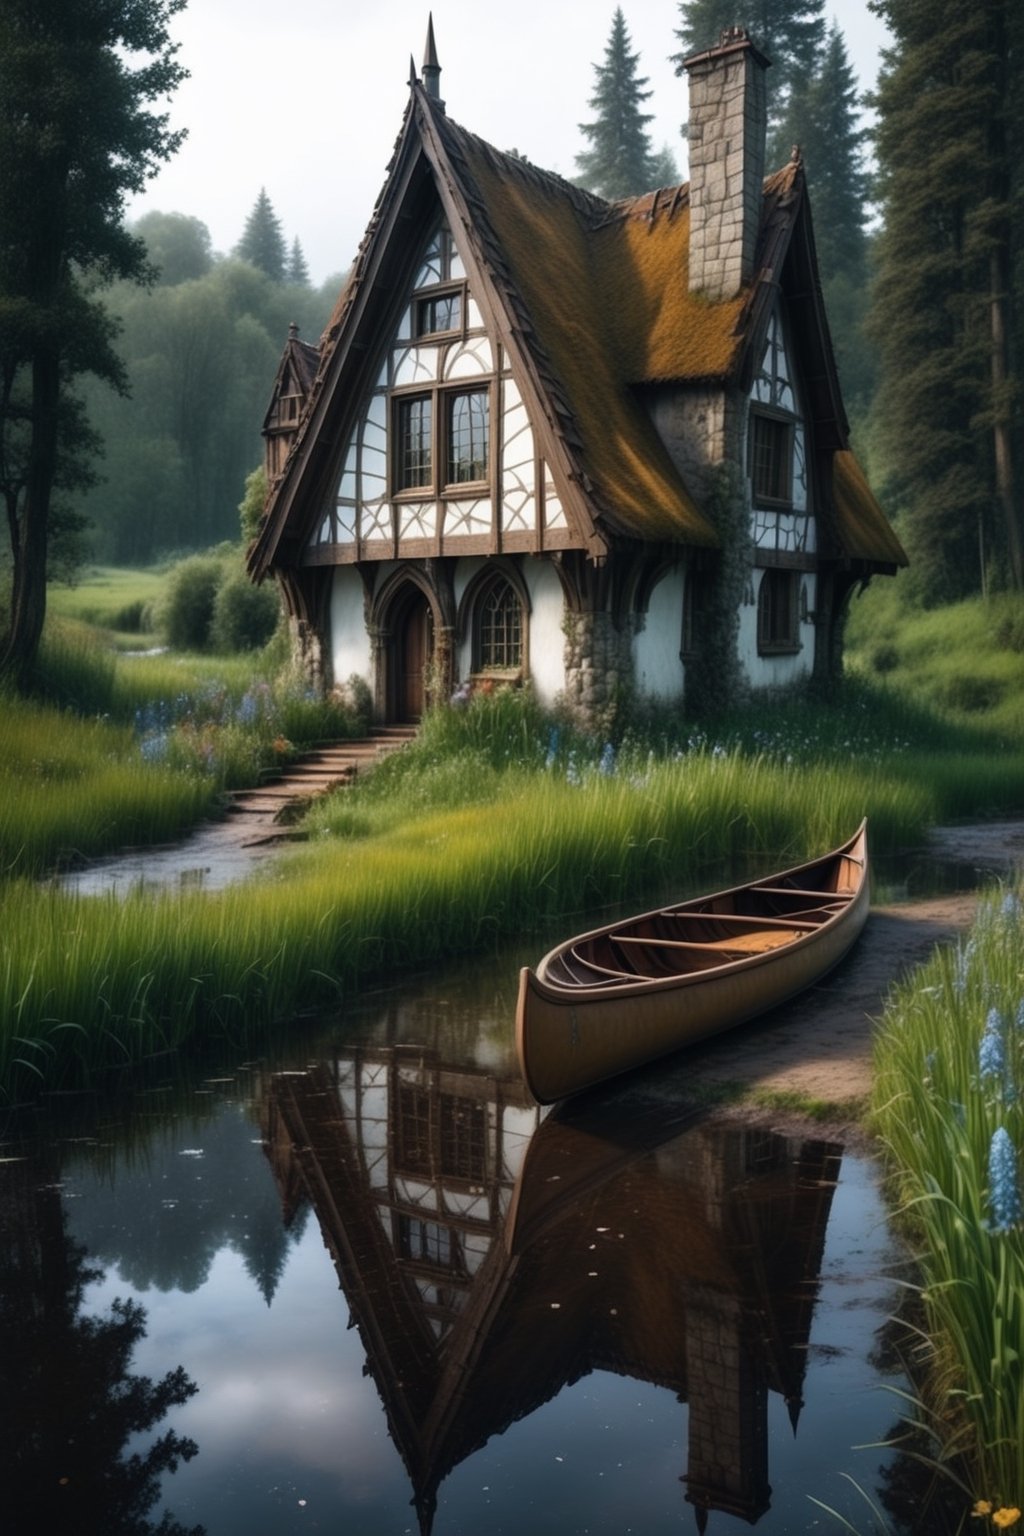 //quality, (masterpiece:1.4), (detailed), ((,best quality,)),//a cozy rusted Gothic house, medieval fantasy vibe, wild flowers, tall grass, pathway, canoe, river, overcast weather, tress, snowing, , sequia forest, mud, puddle reflection, (snowfall outside), built over a cliff, hobbit house